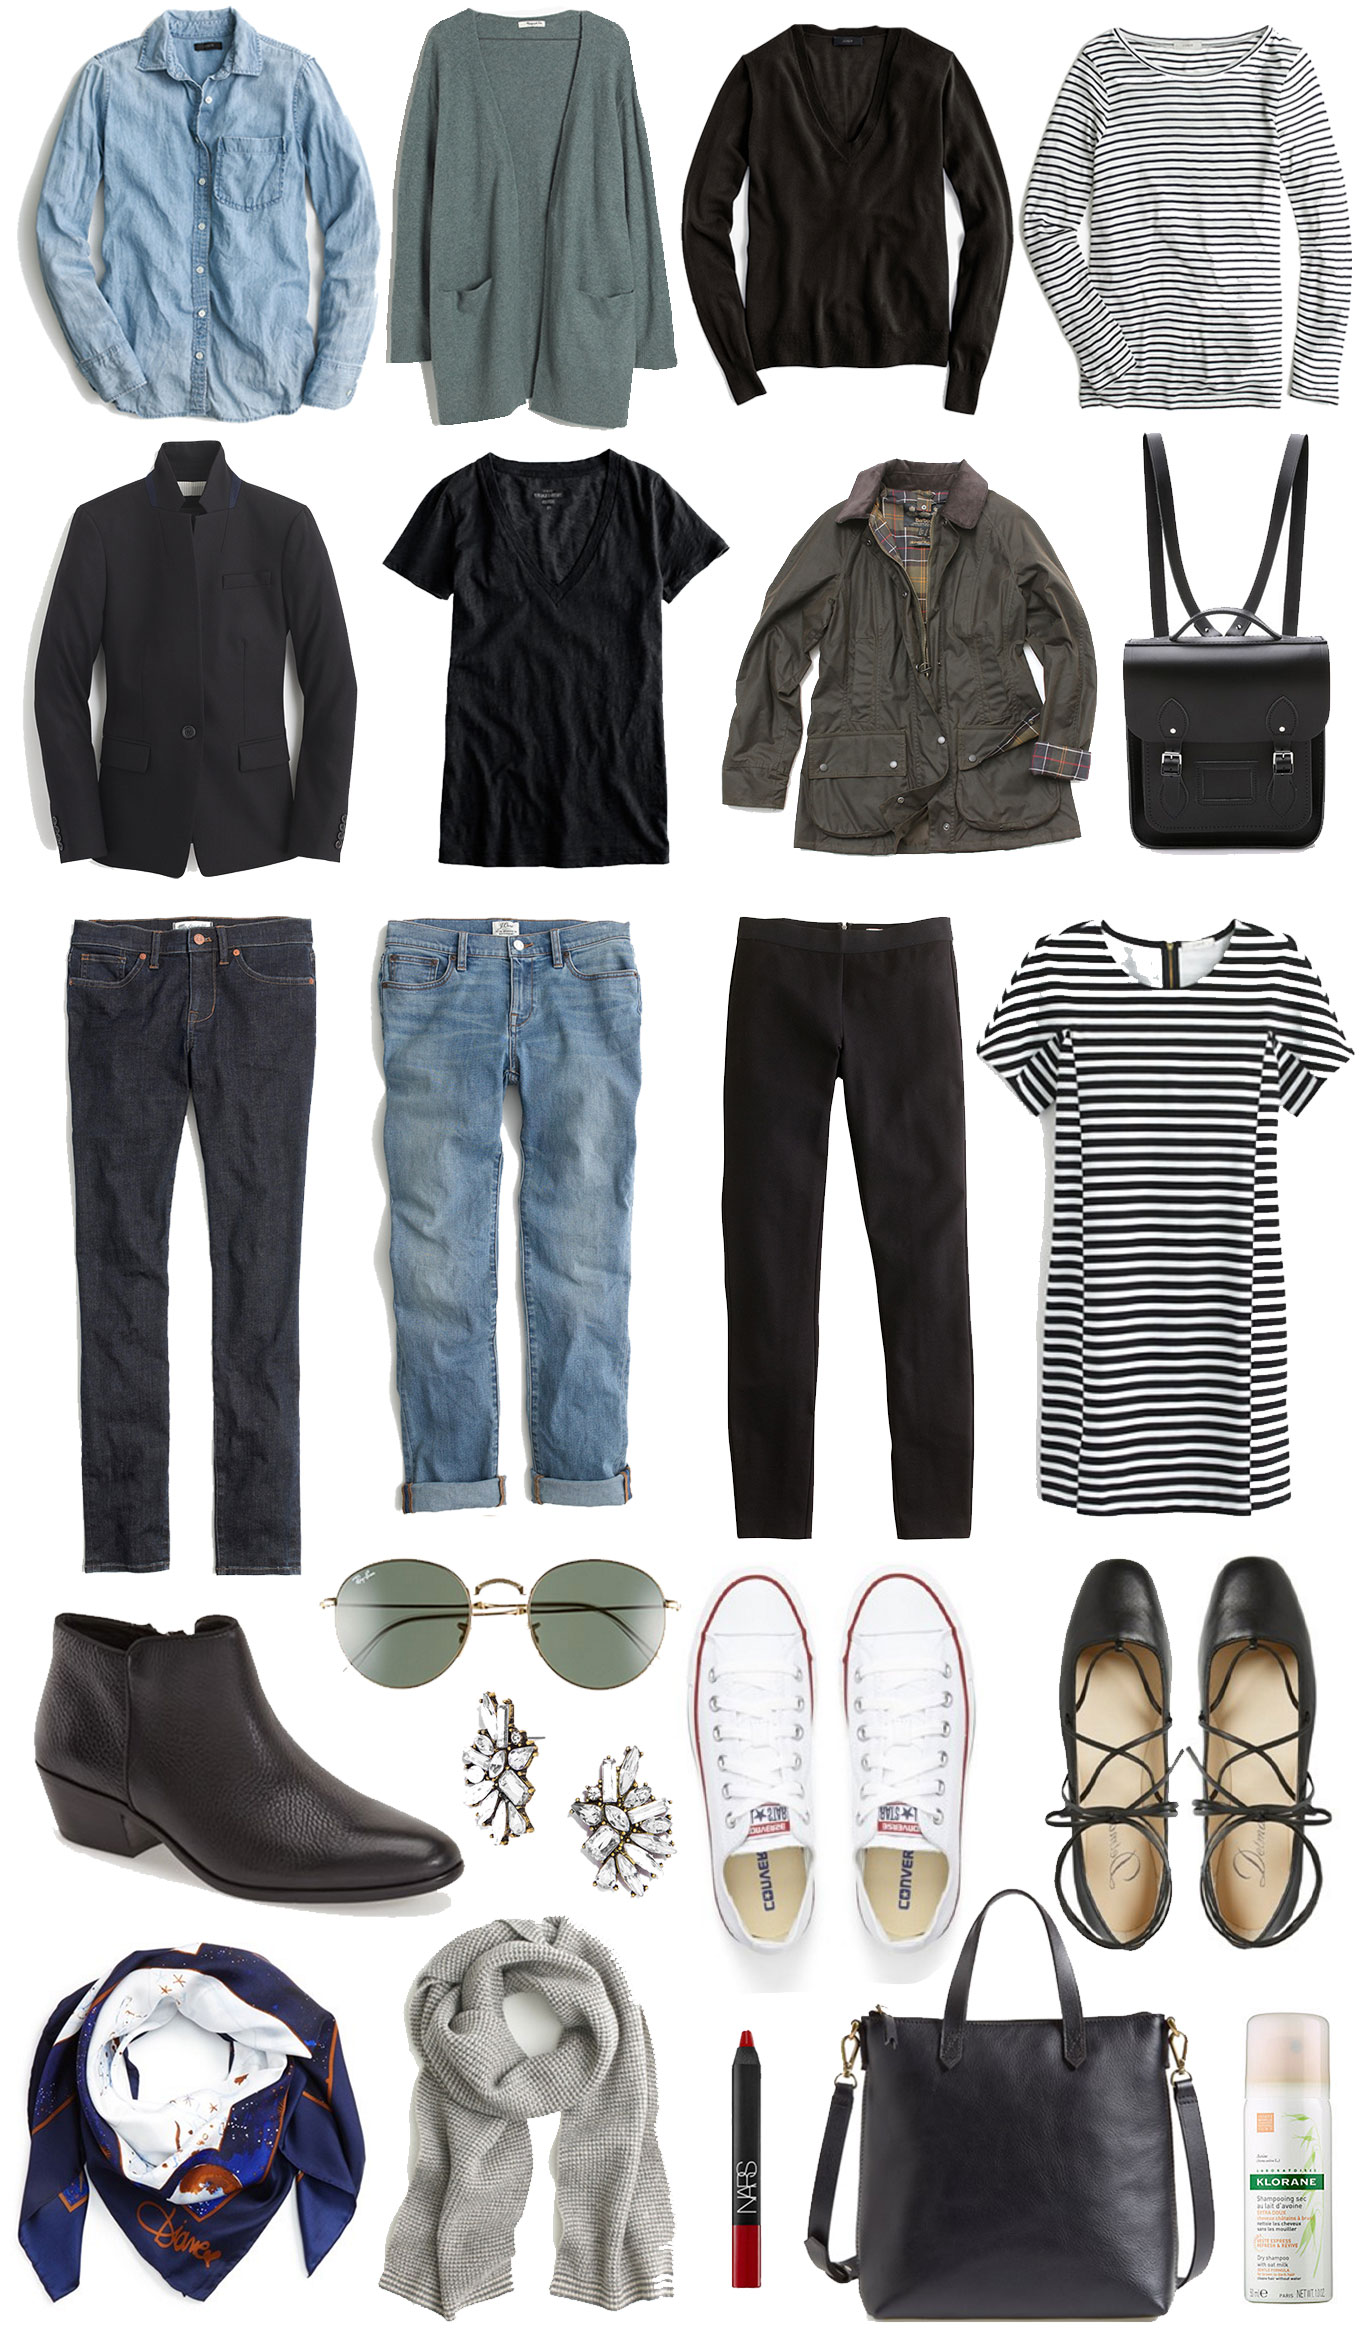 Travel Capsule Wardrobe: The Ultimate Packing Guide